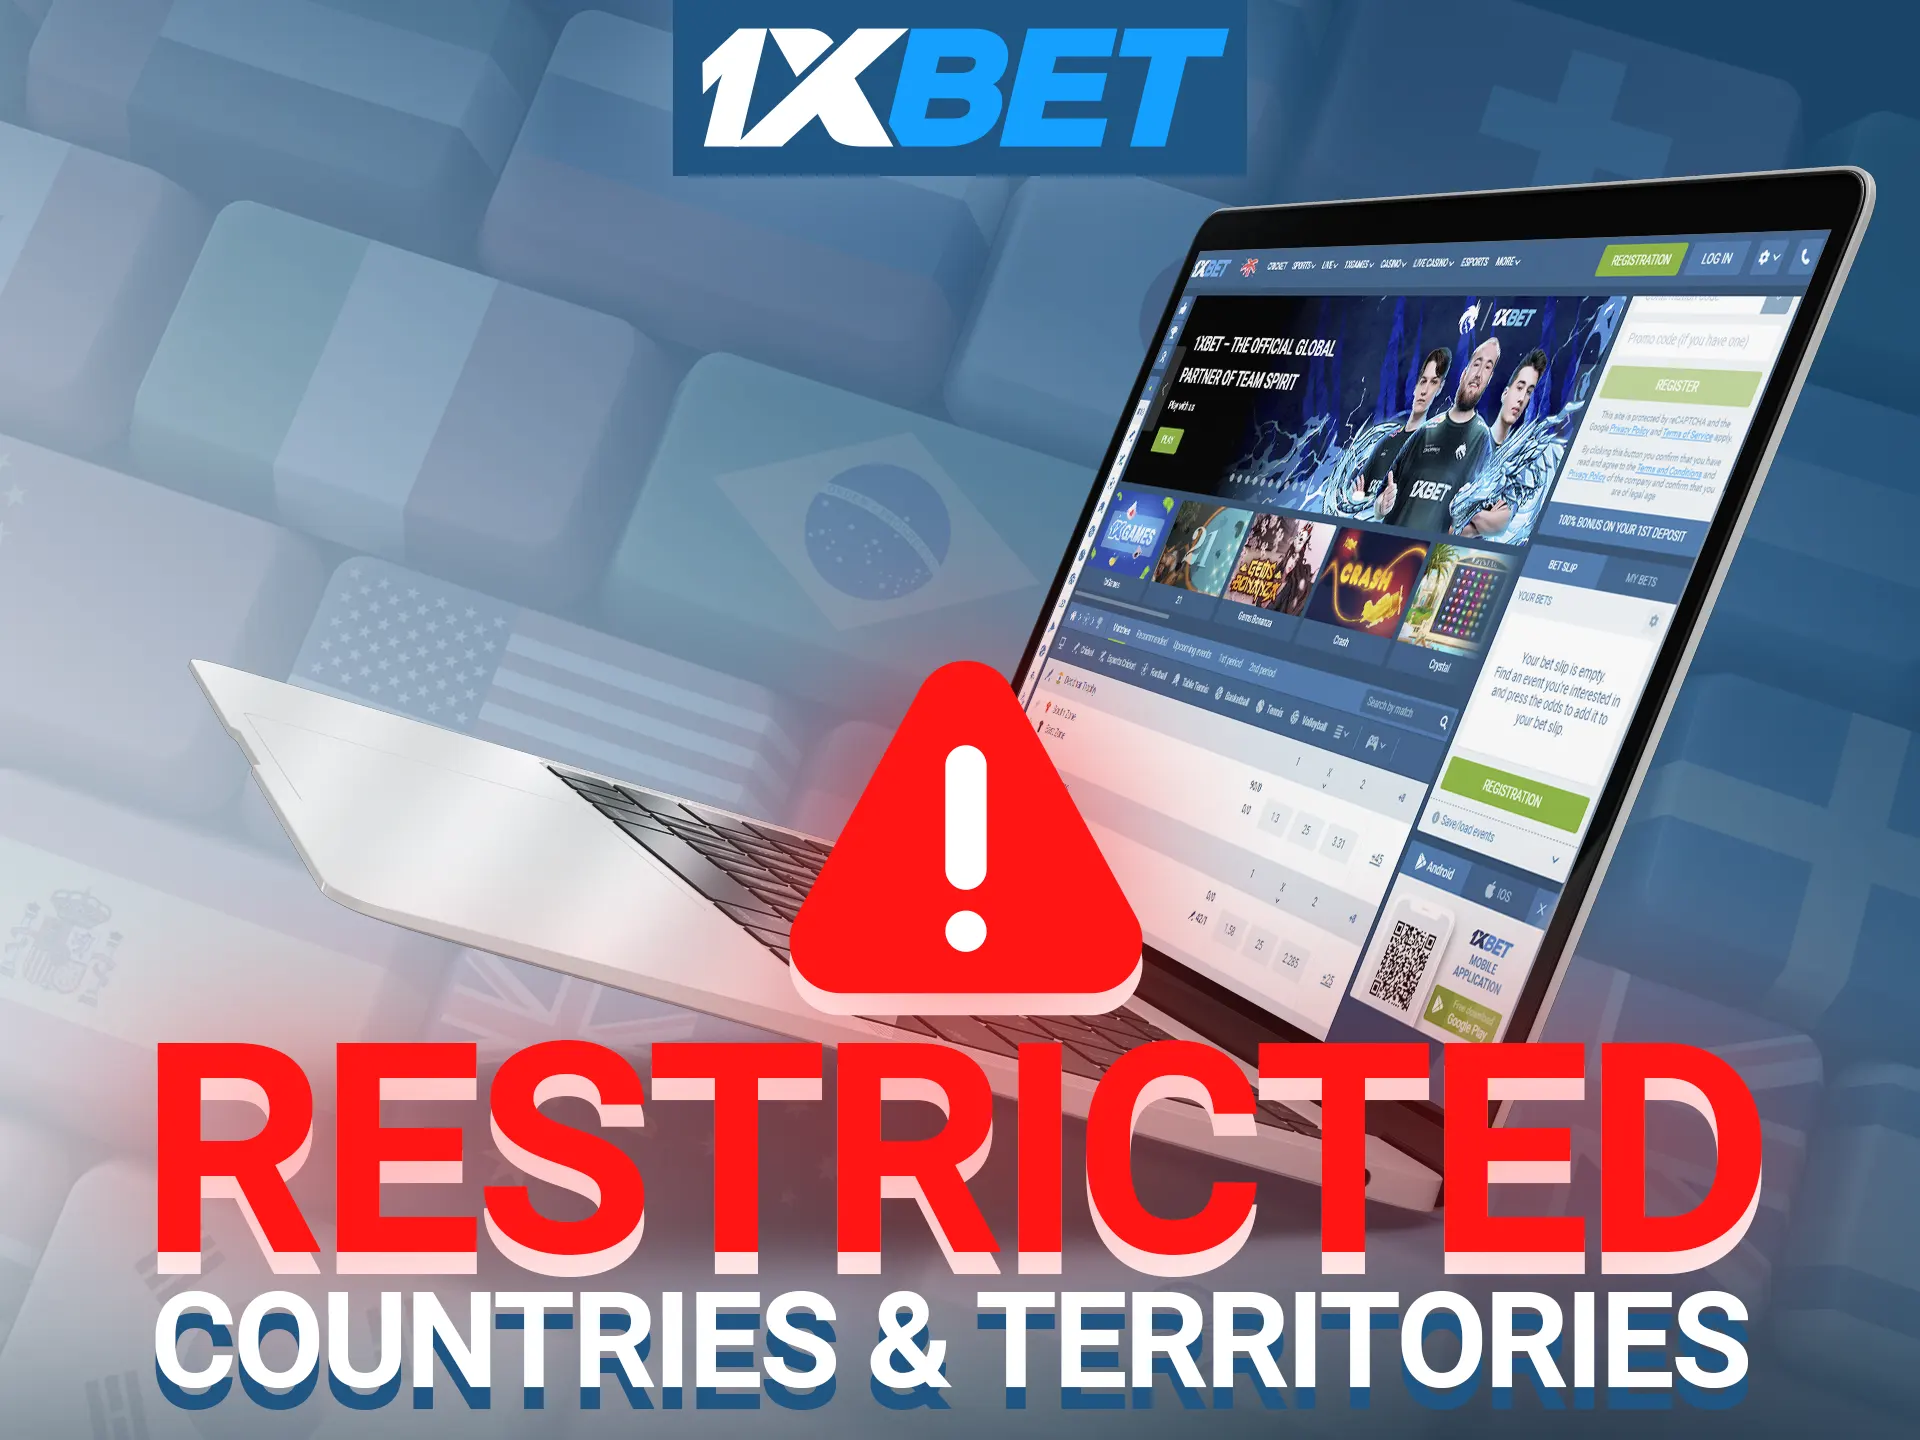 Unfortunately, due to the various regulations surrounding online gambling across the world, many jurisdictions have prohibited access to the 1xBet website.